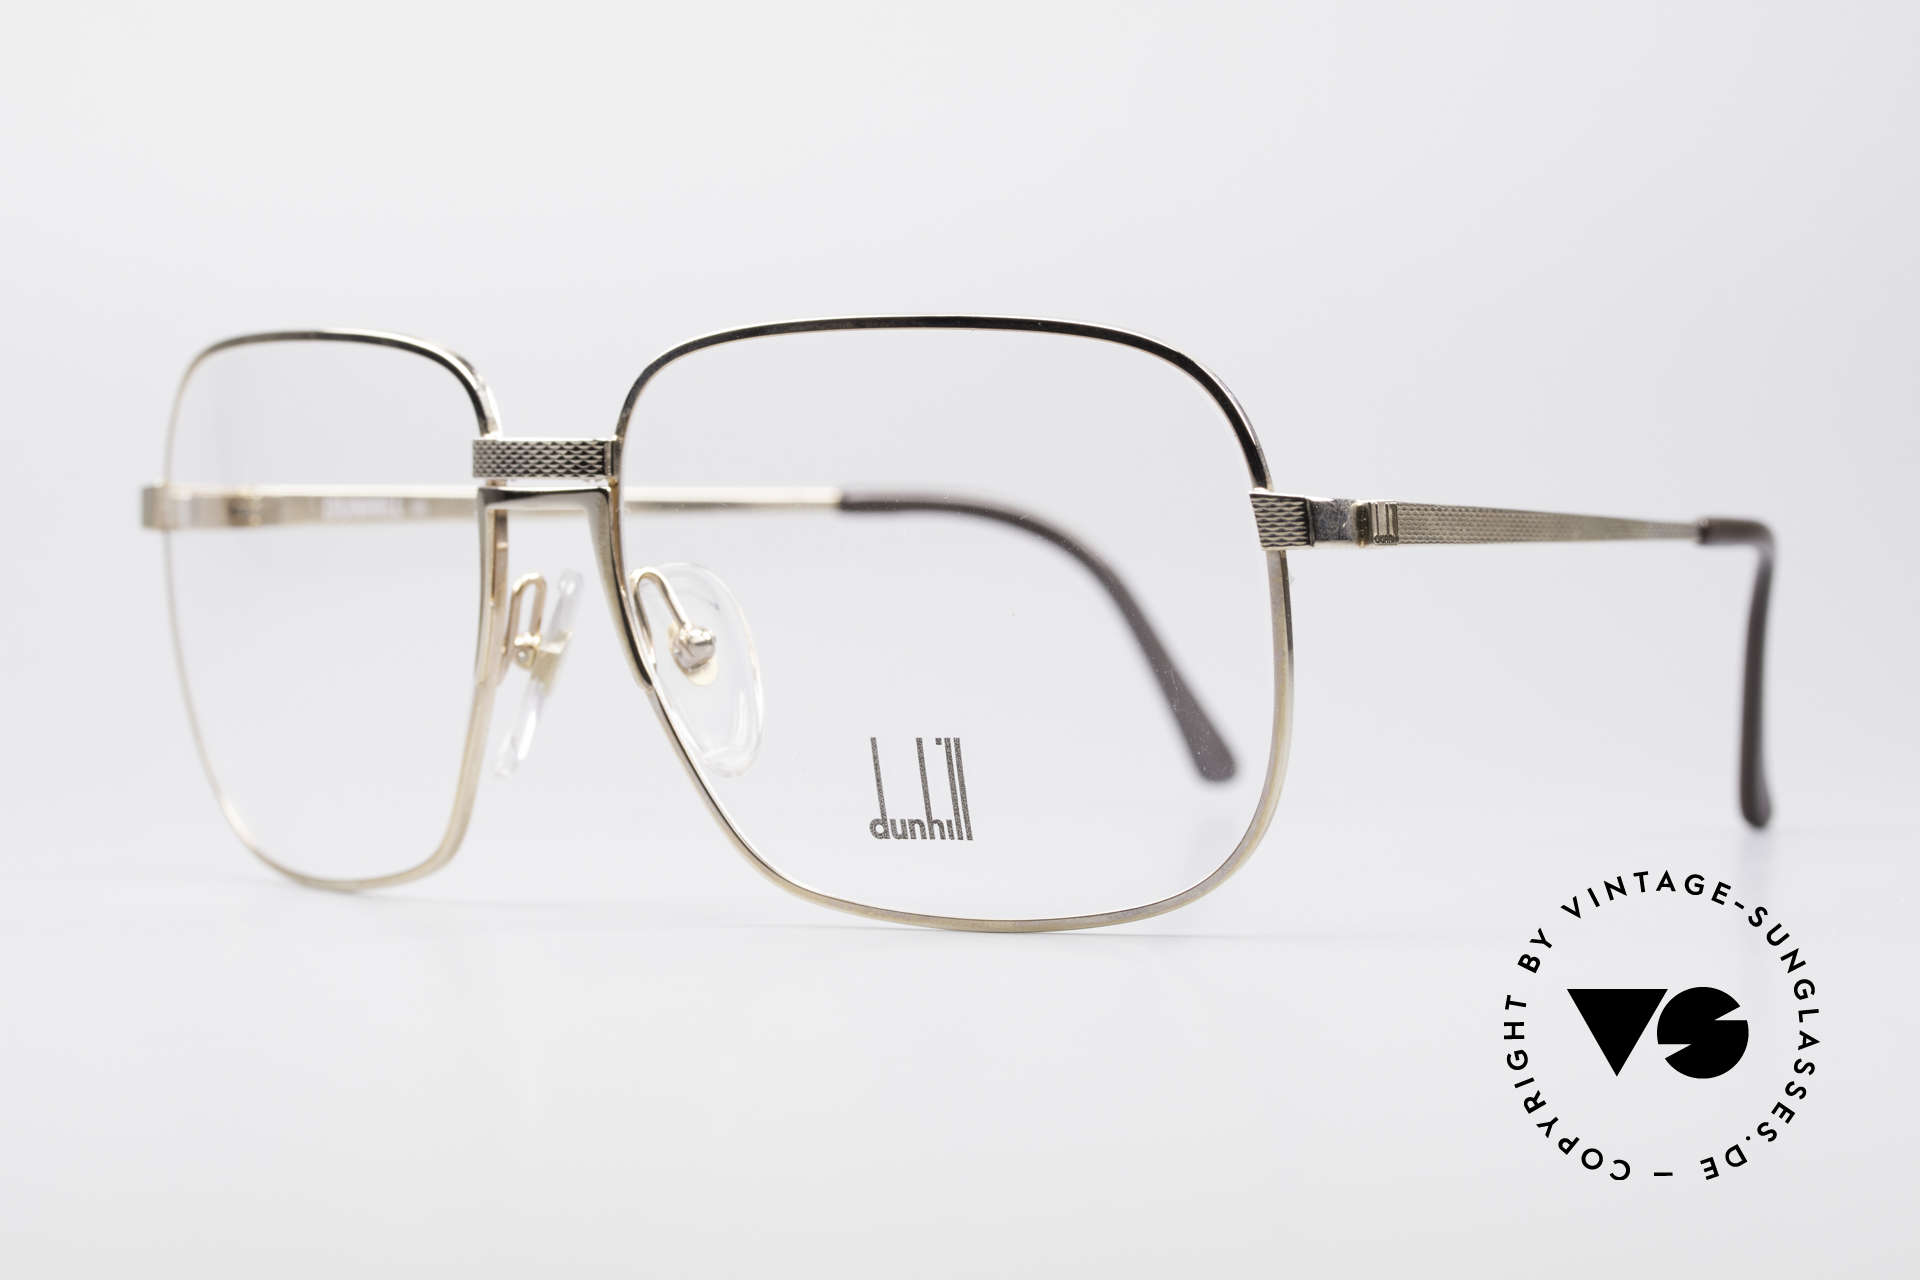 Dunhill 6090 Gold Plated 90's Eyeglasses, gold-plated frame with flexible bridge; 1. class comfort, Made for Men